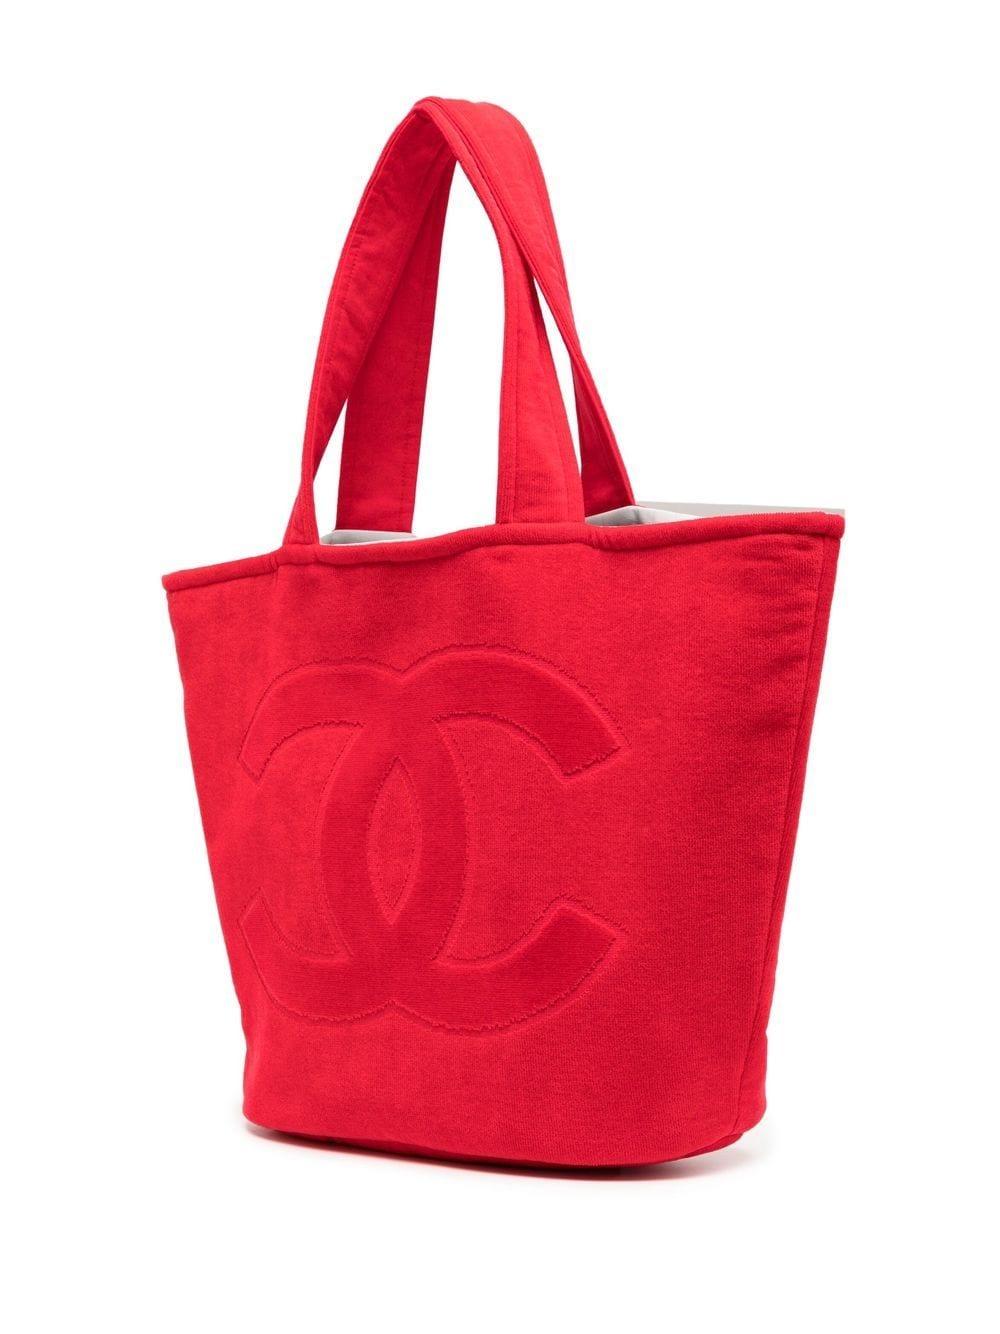 Chanel Tote 2020 - 2 For Sale on 1stDibs